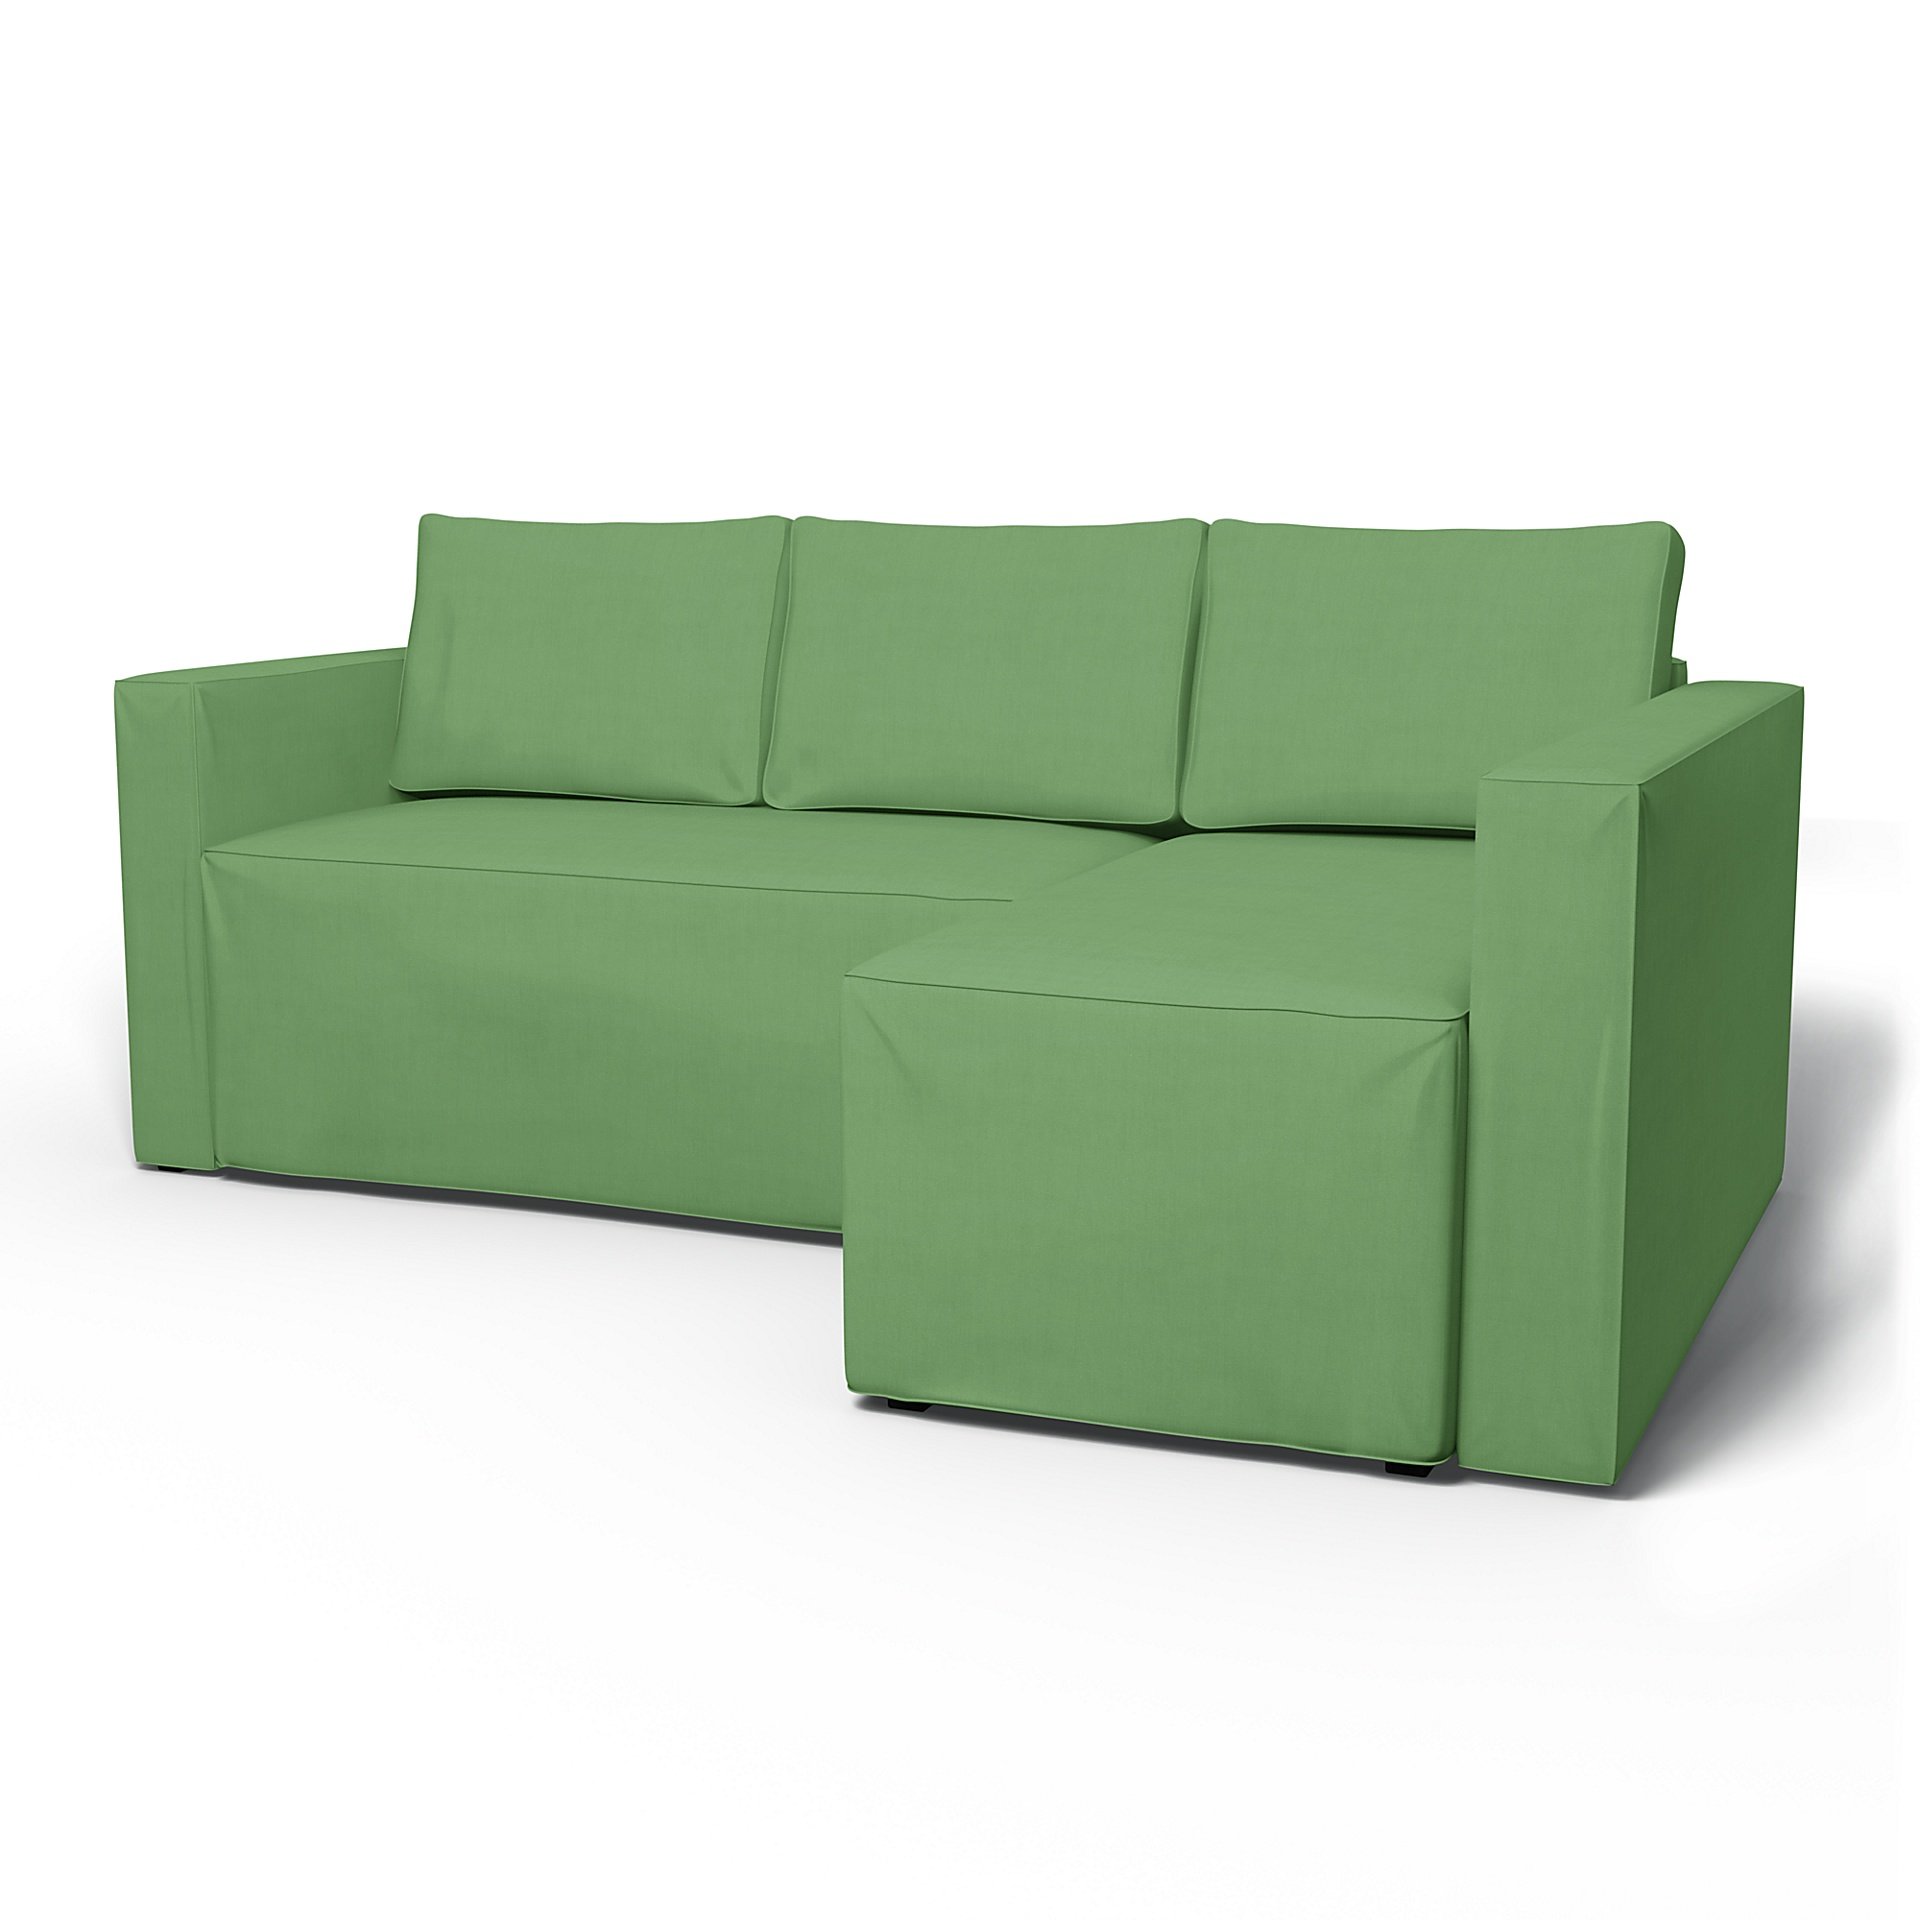 IKEA - Manstad Sofa Bed with Right Chaise Cover, Apple Green, Linen - Bemz